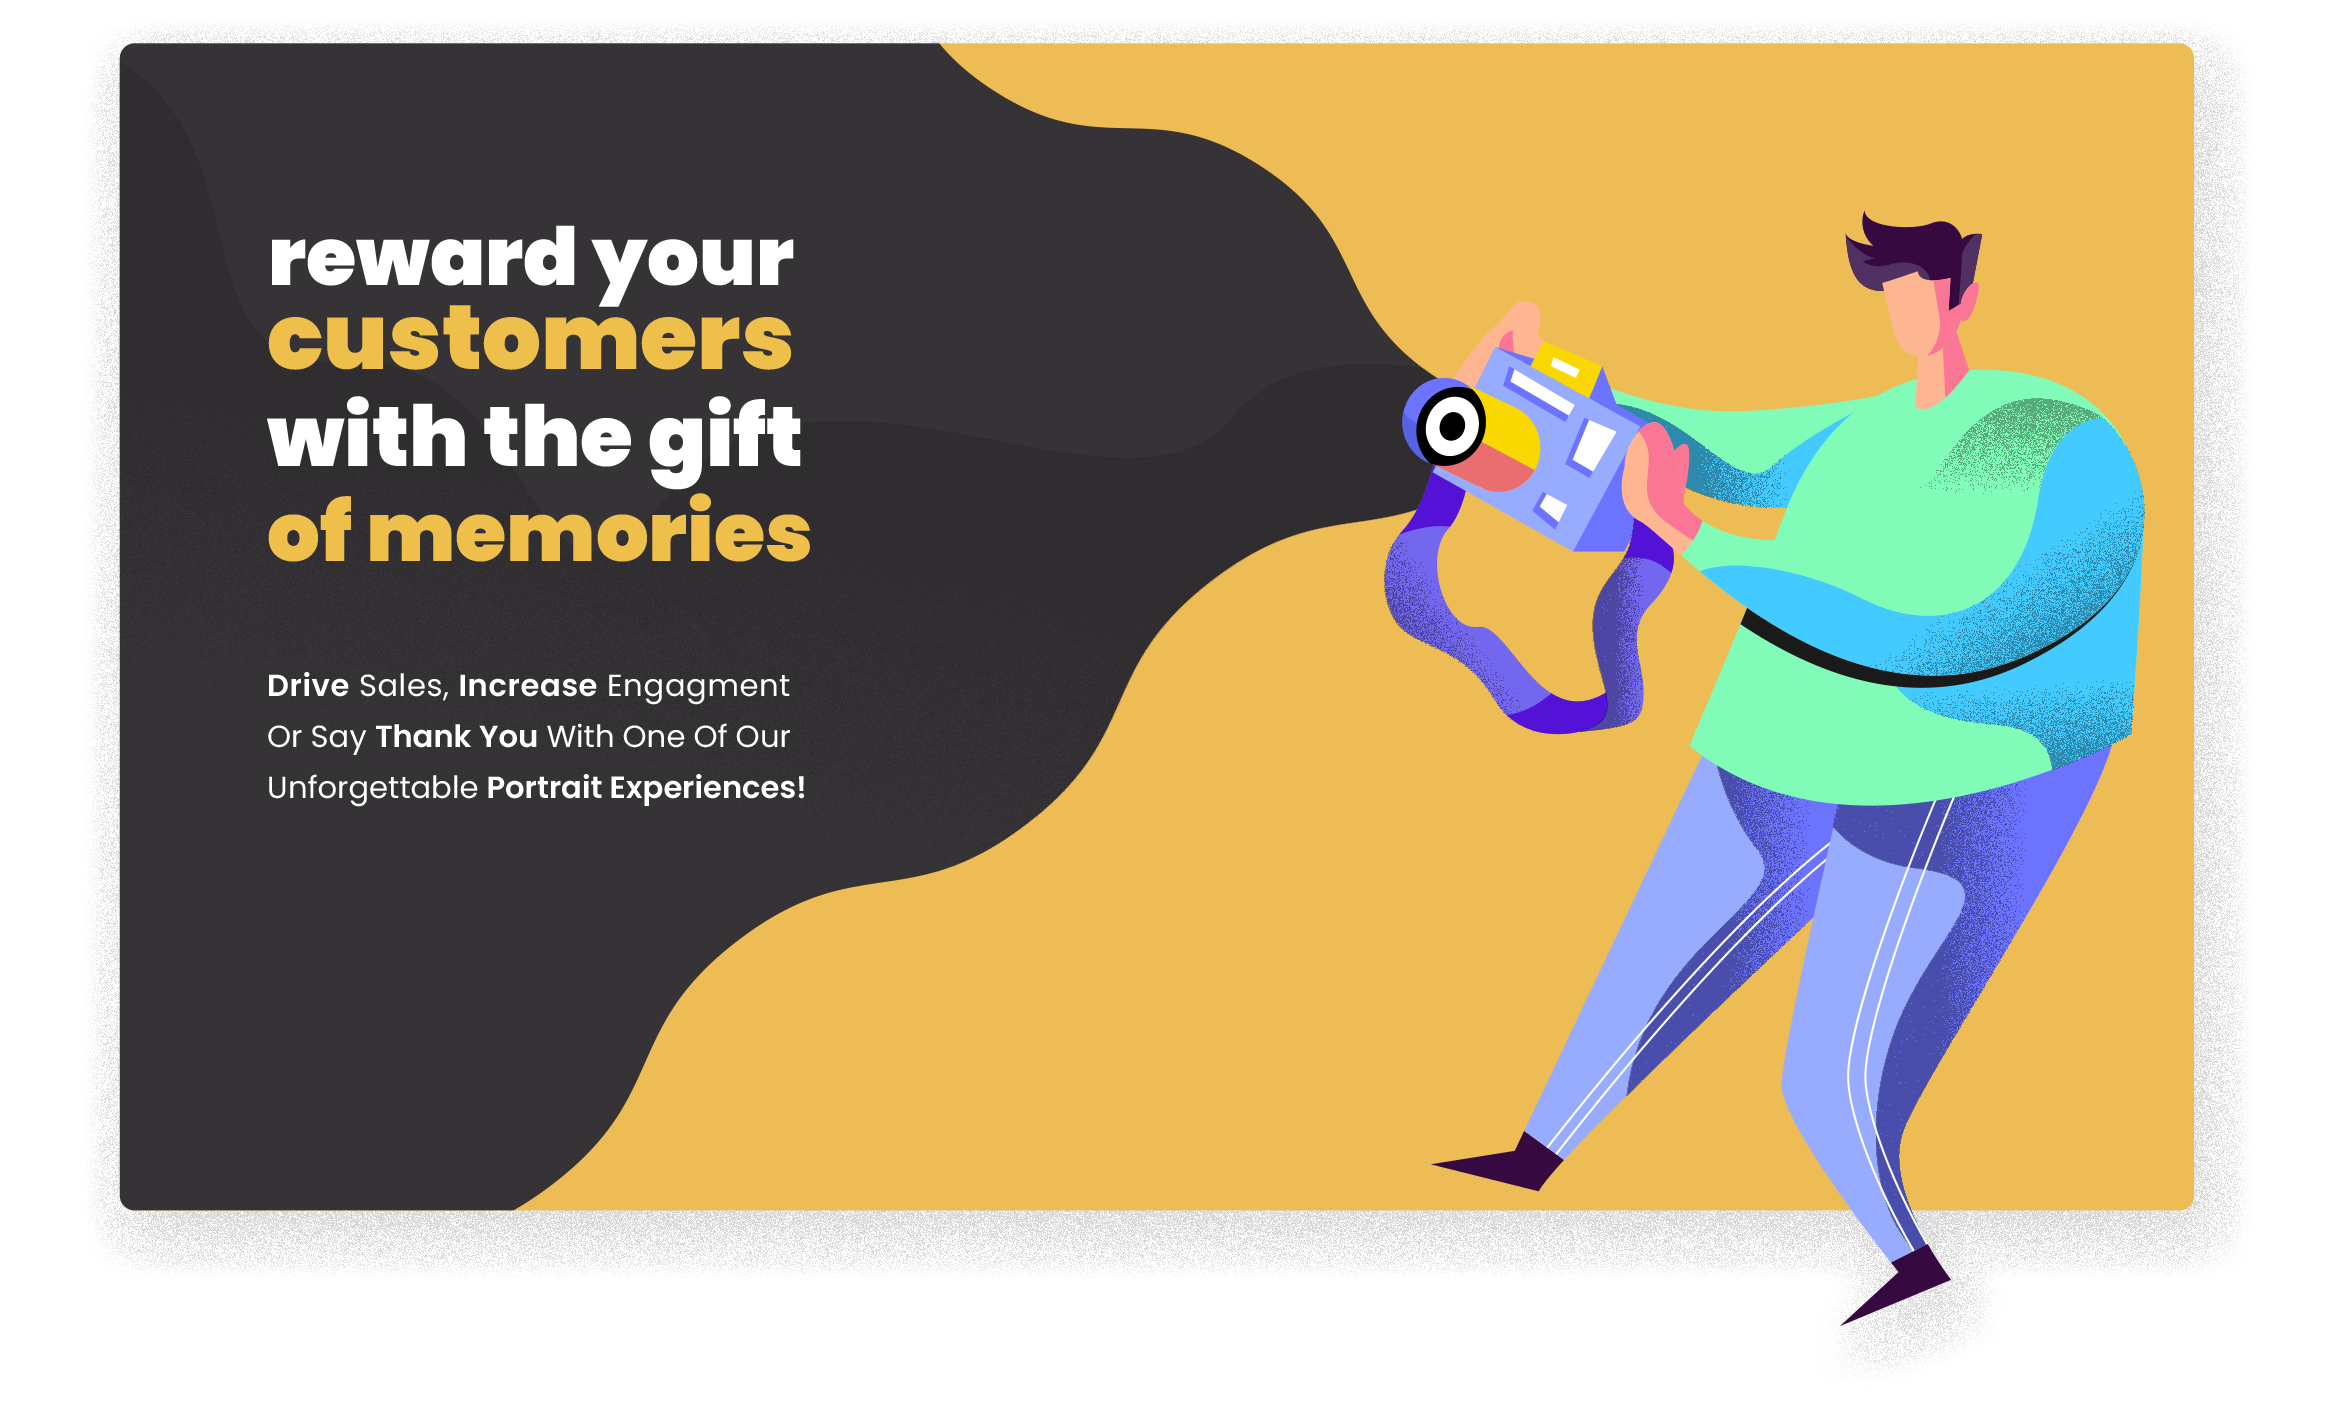 reward your customers with the gift of memories. drive sales, increase engagement or say thank you with one of our unforgettable portrait experiences!